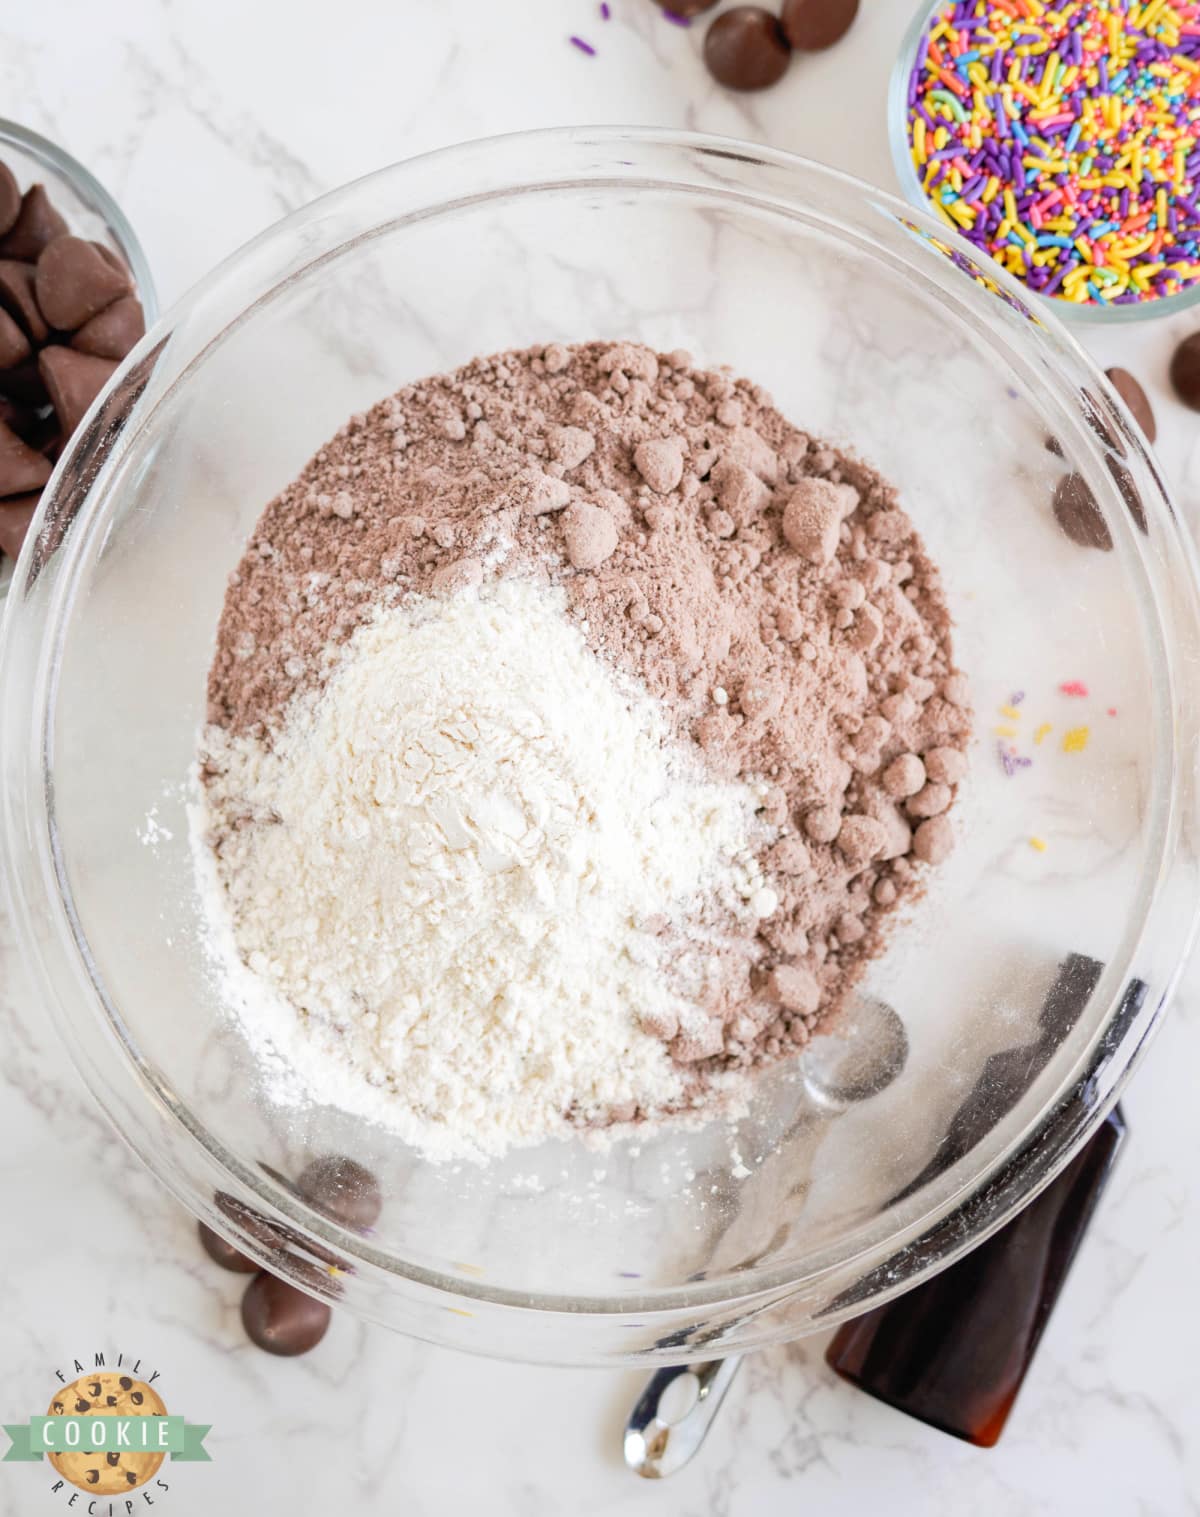 Mixing flour and brownie mix together. 